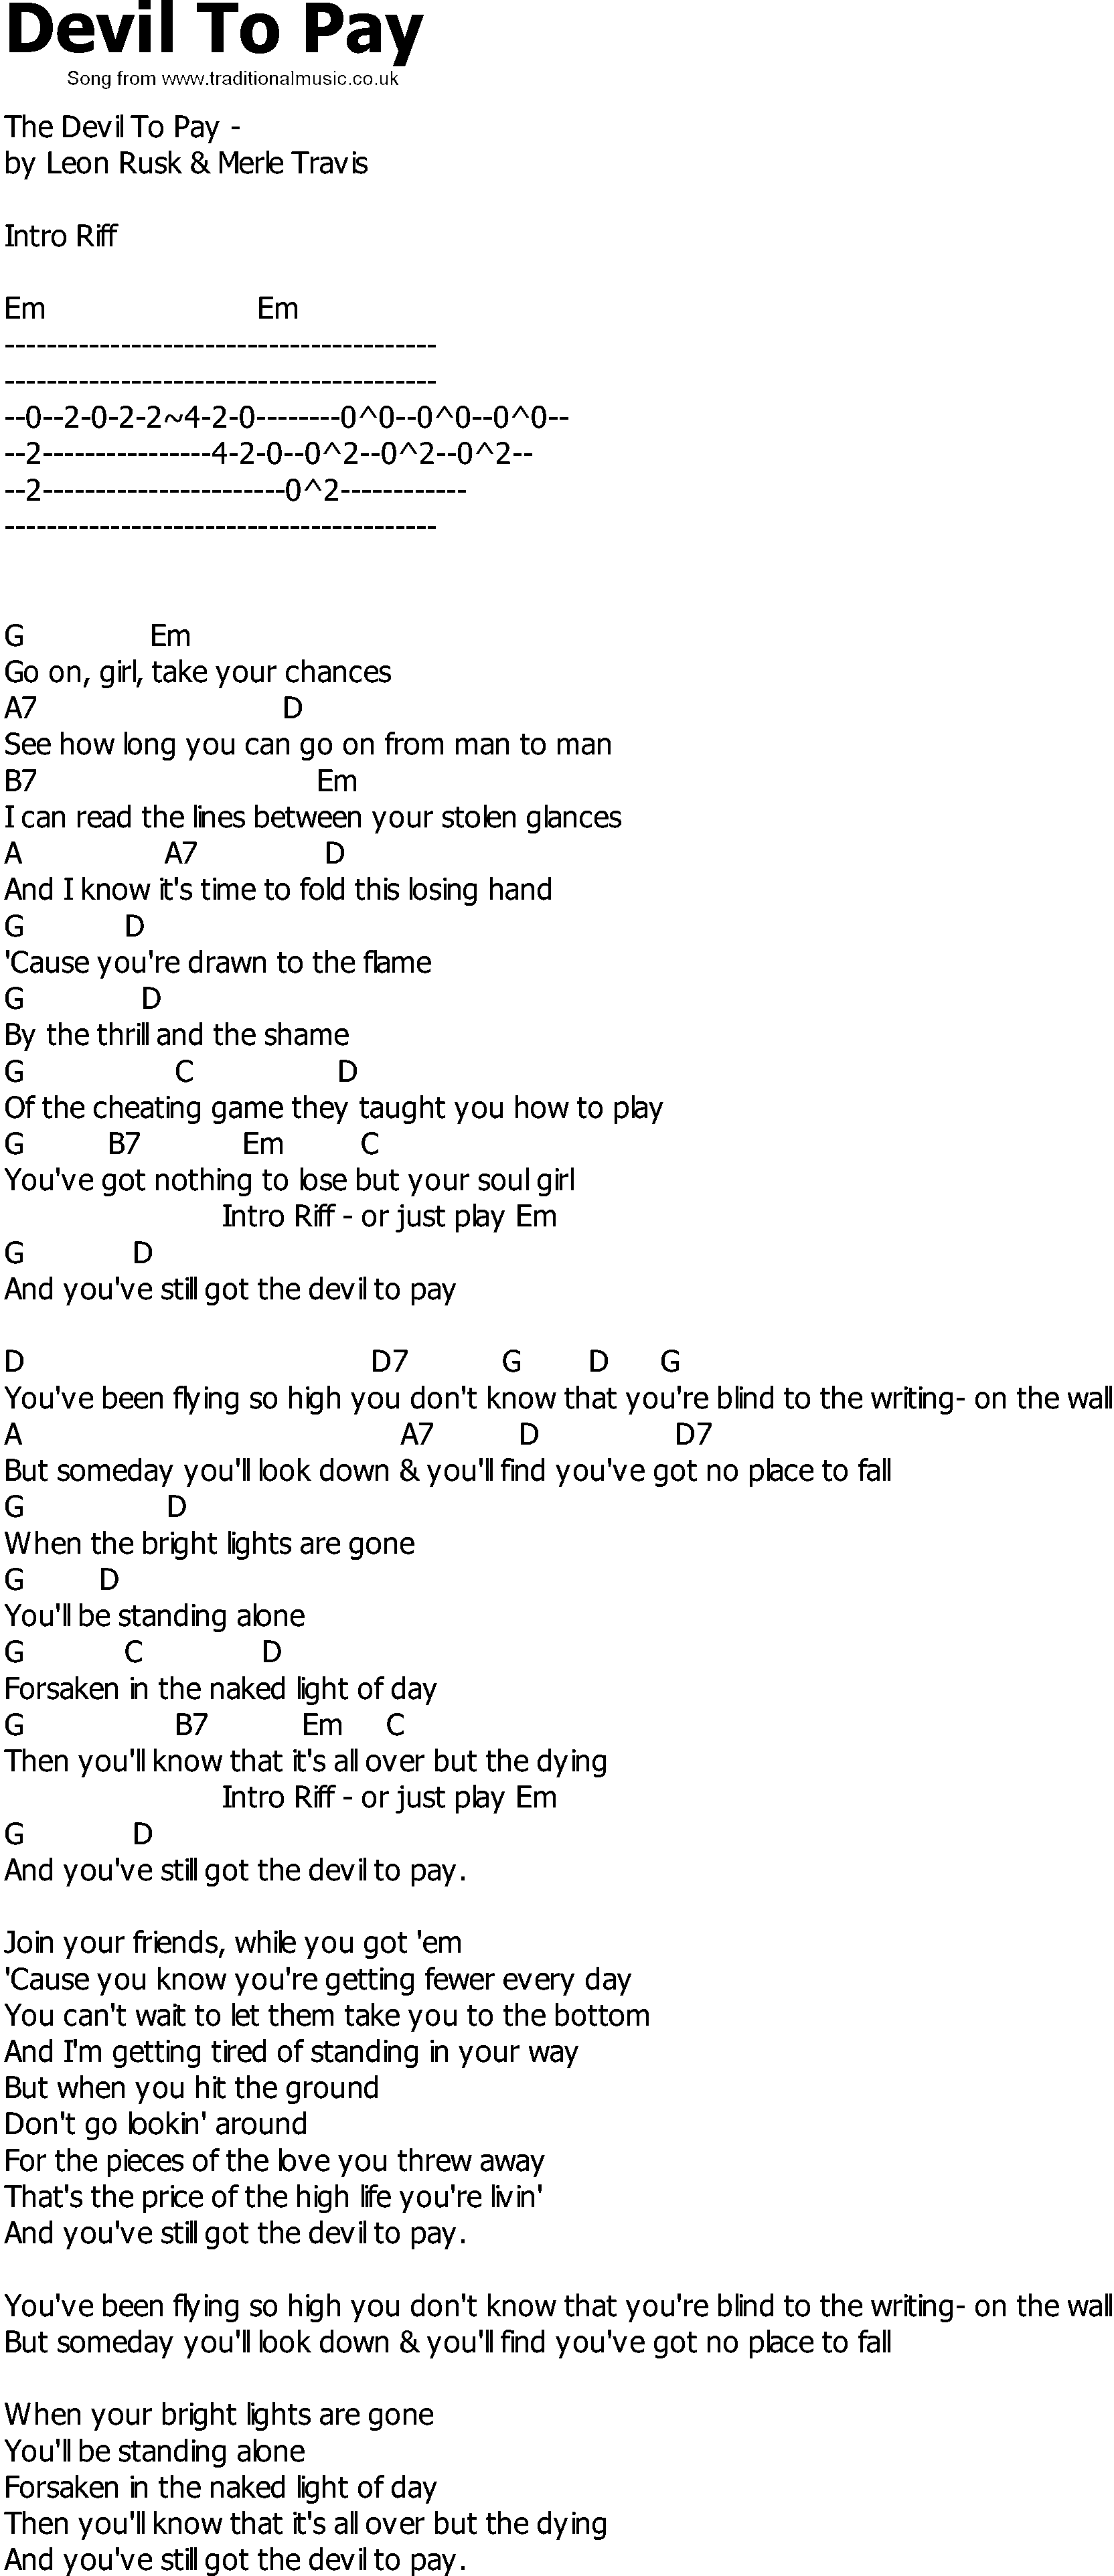 Old Country song lyrics with chords - Devil To Pay